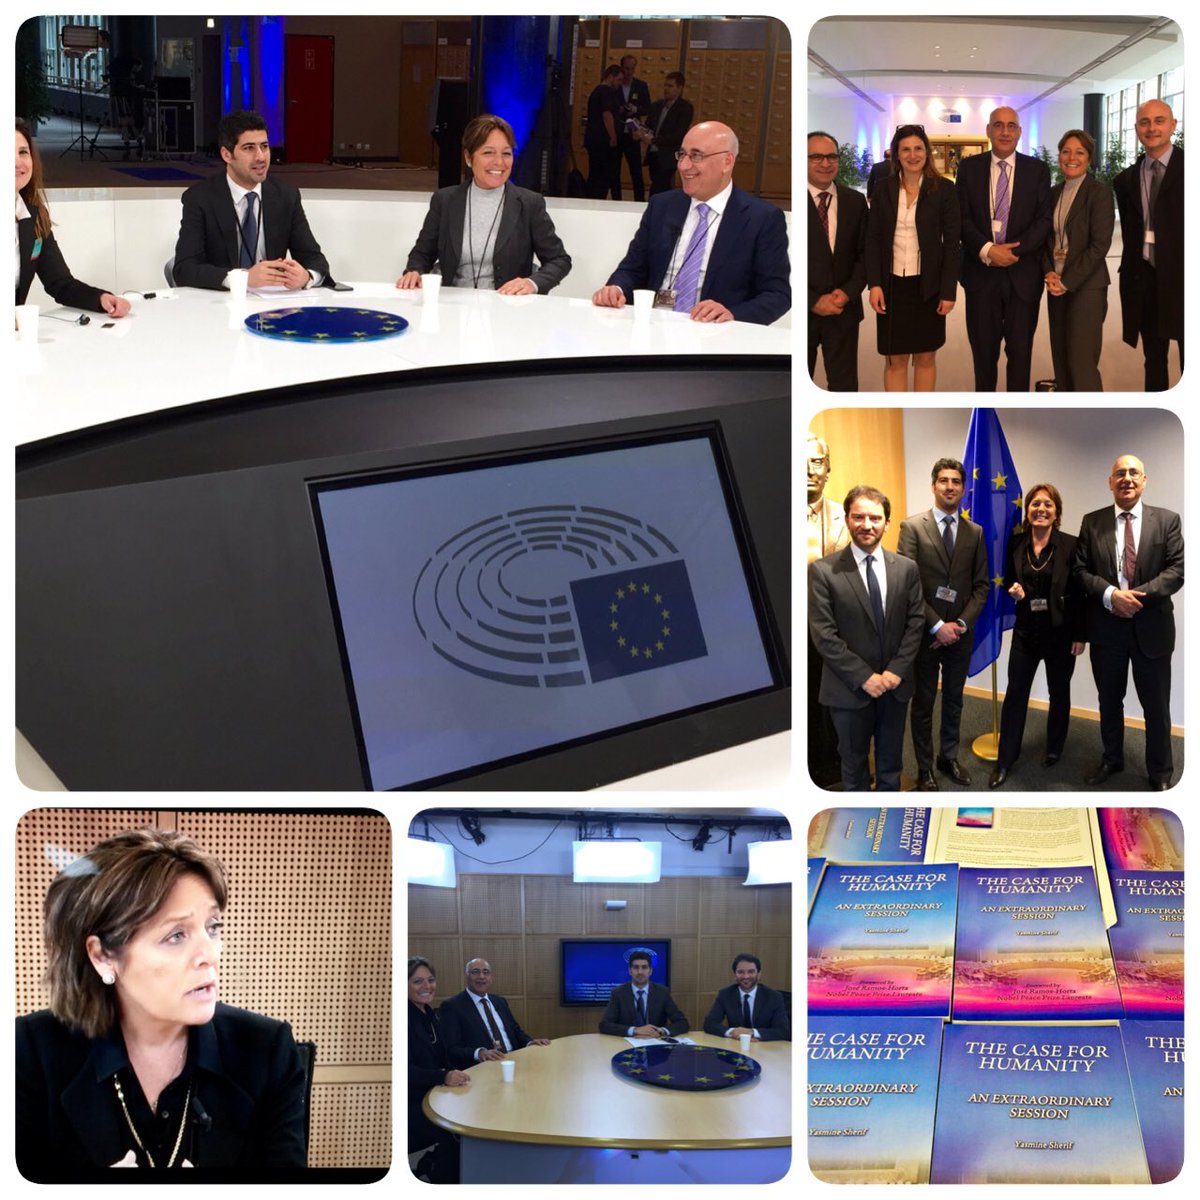 #humanity, The Case for Humanity, + Global Center for Justice & Humanity, launched in Brussels, EU, EP. #Sharehumanity